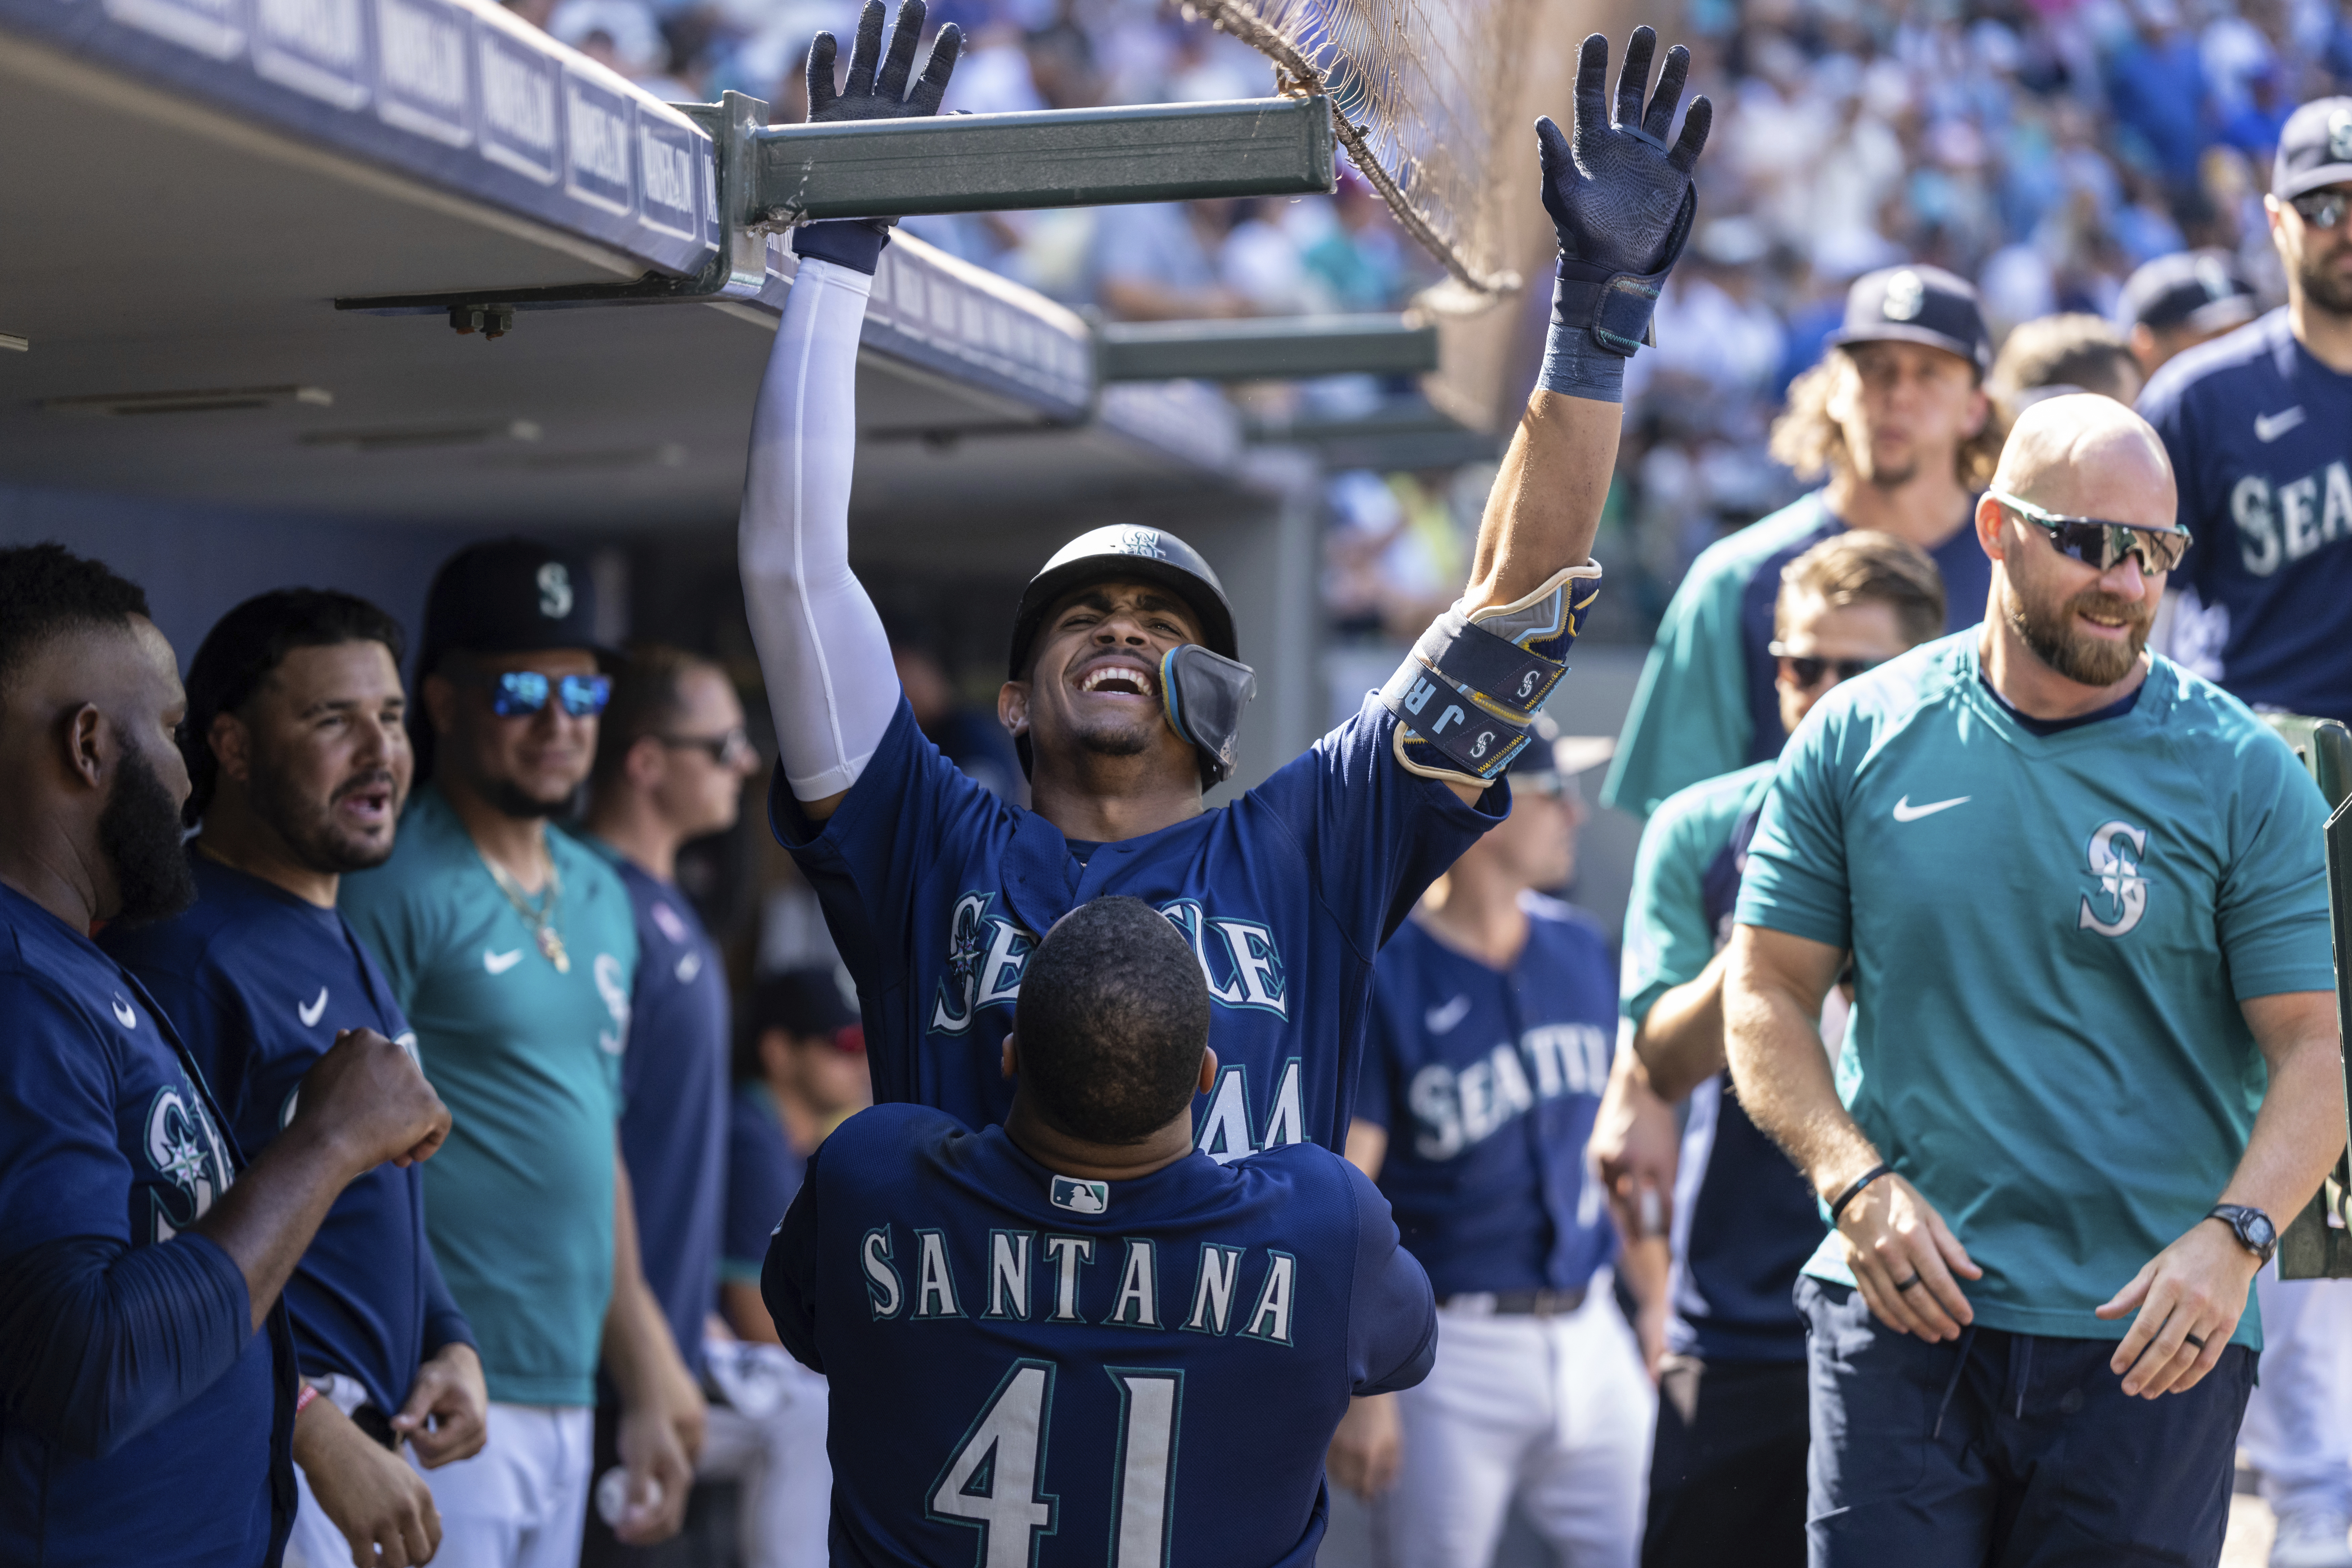 Julio Rodríguez opens up on his (and the Mariners') turnaround, and being  mentored by Ken Griffey Jr.